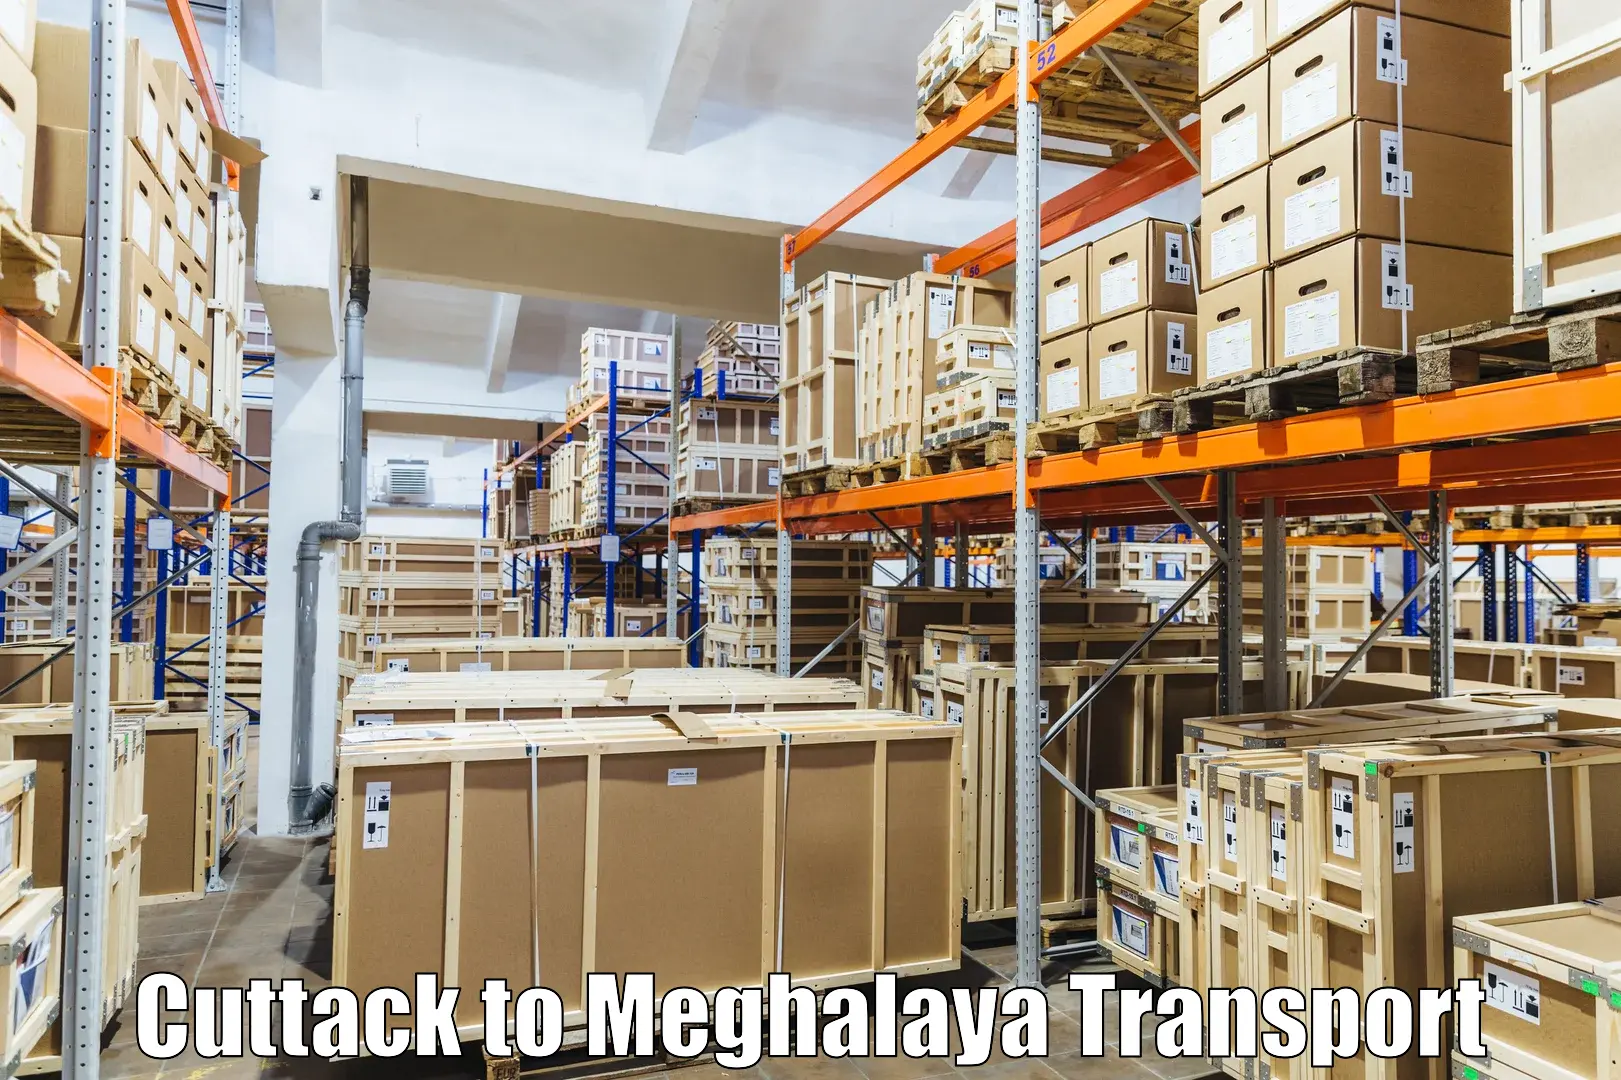 Vehicle transport services Cuttack to Meghalaya